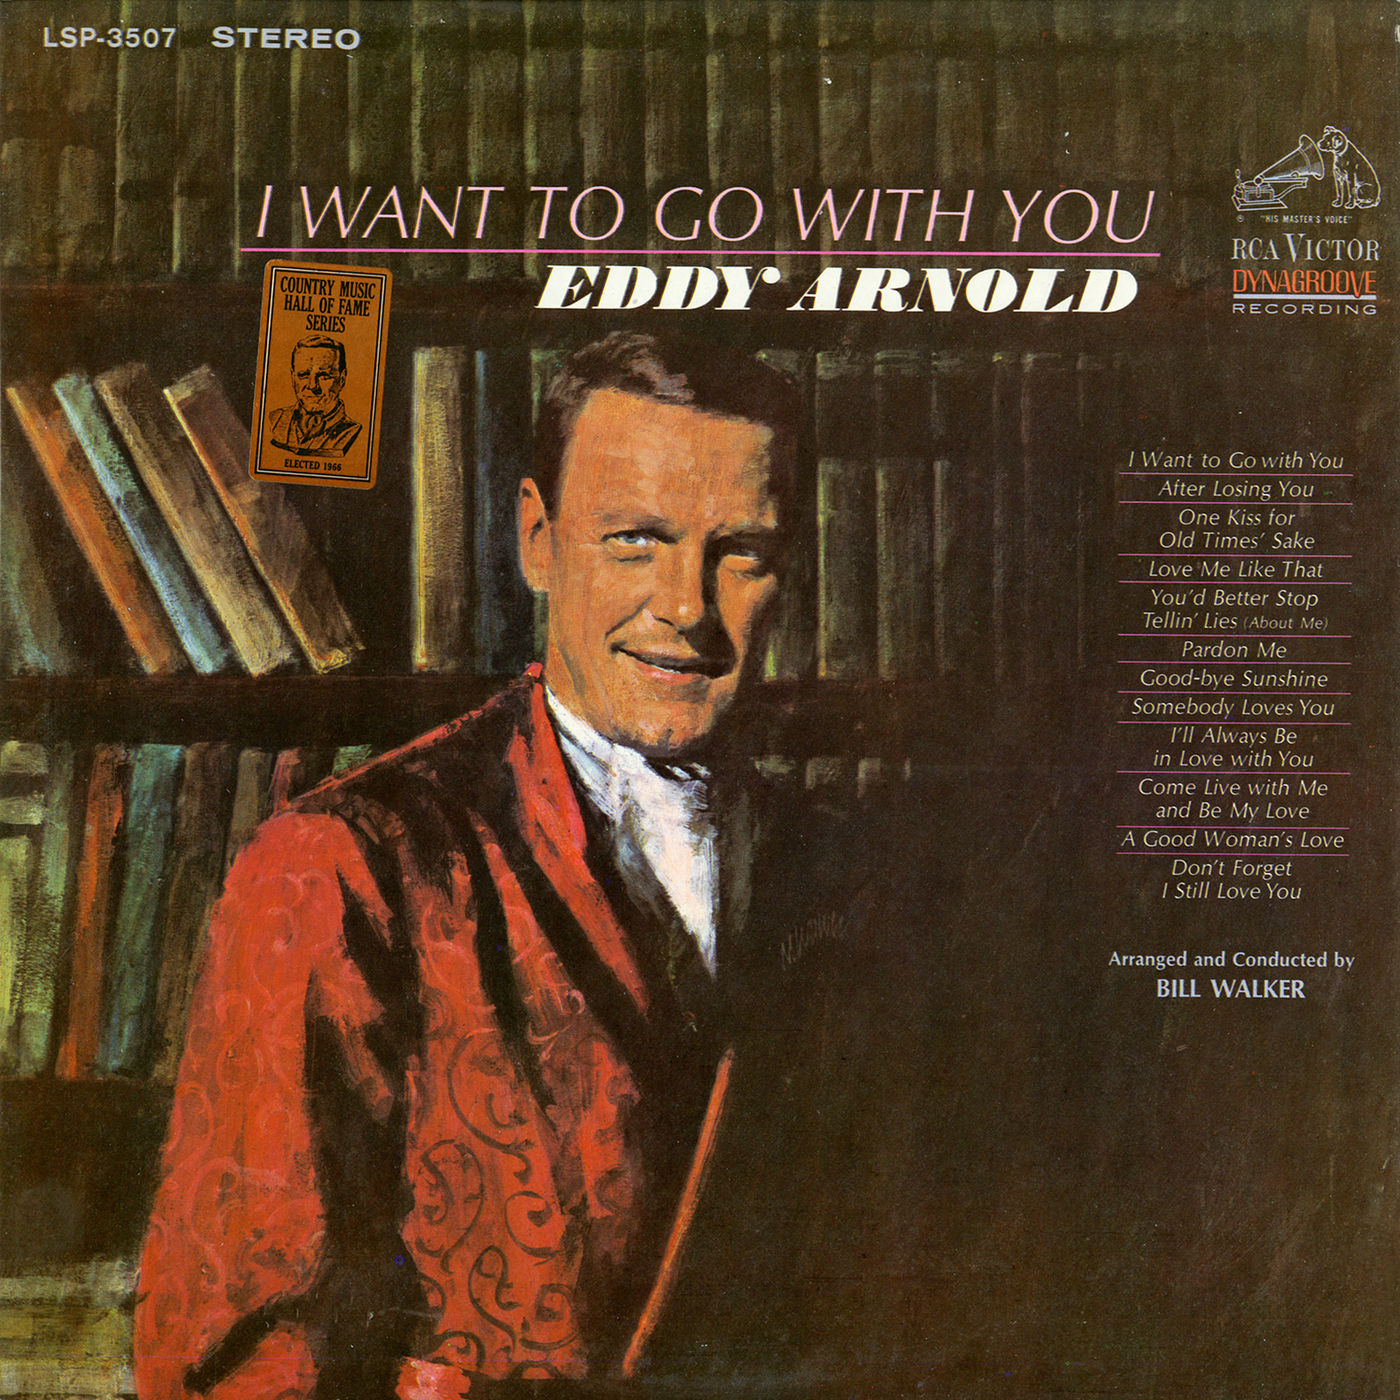 Eddy Arnold – I Want to Go with You